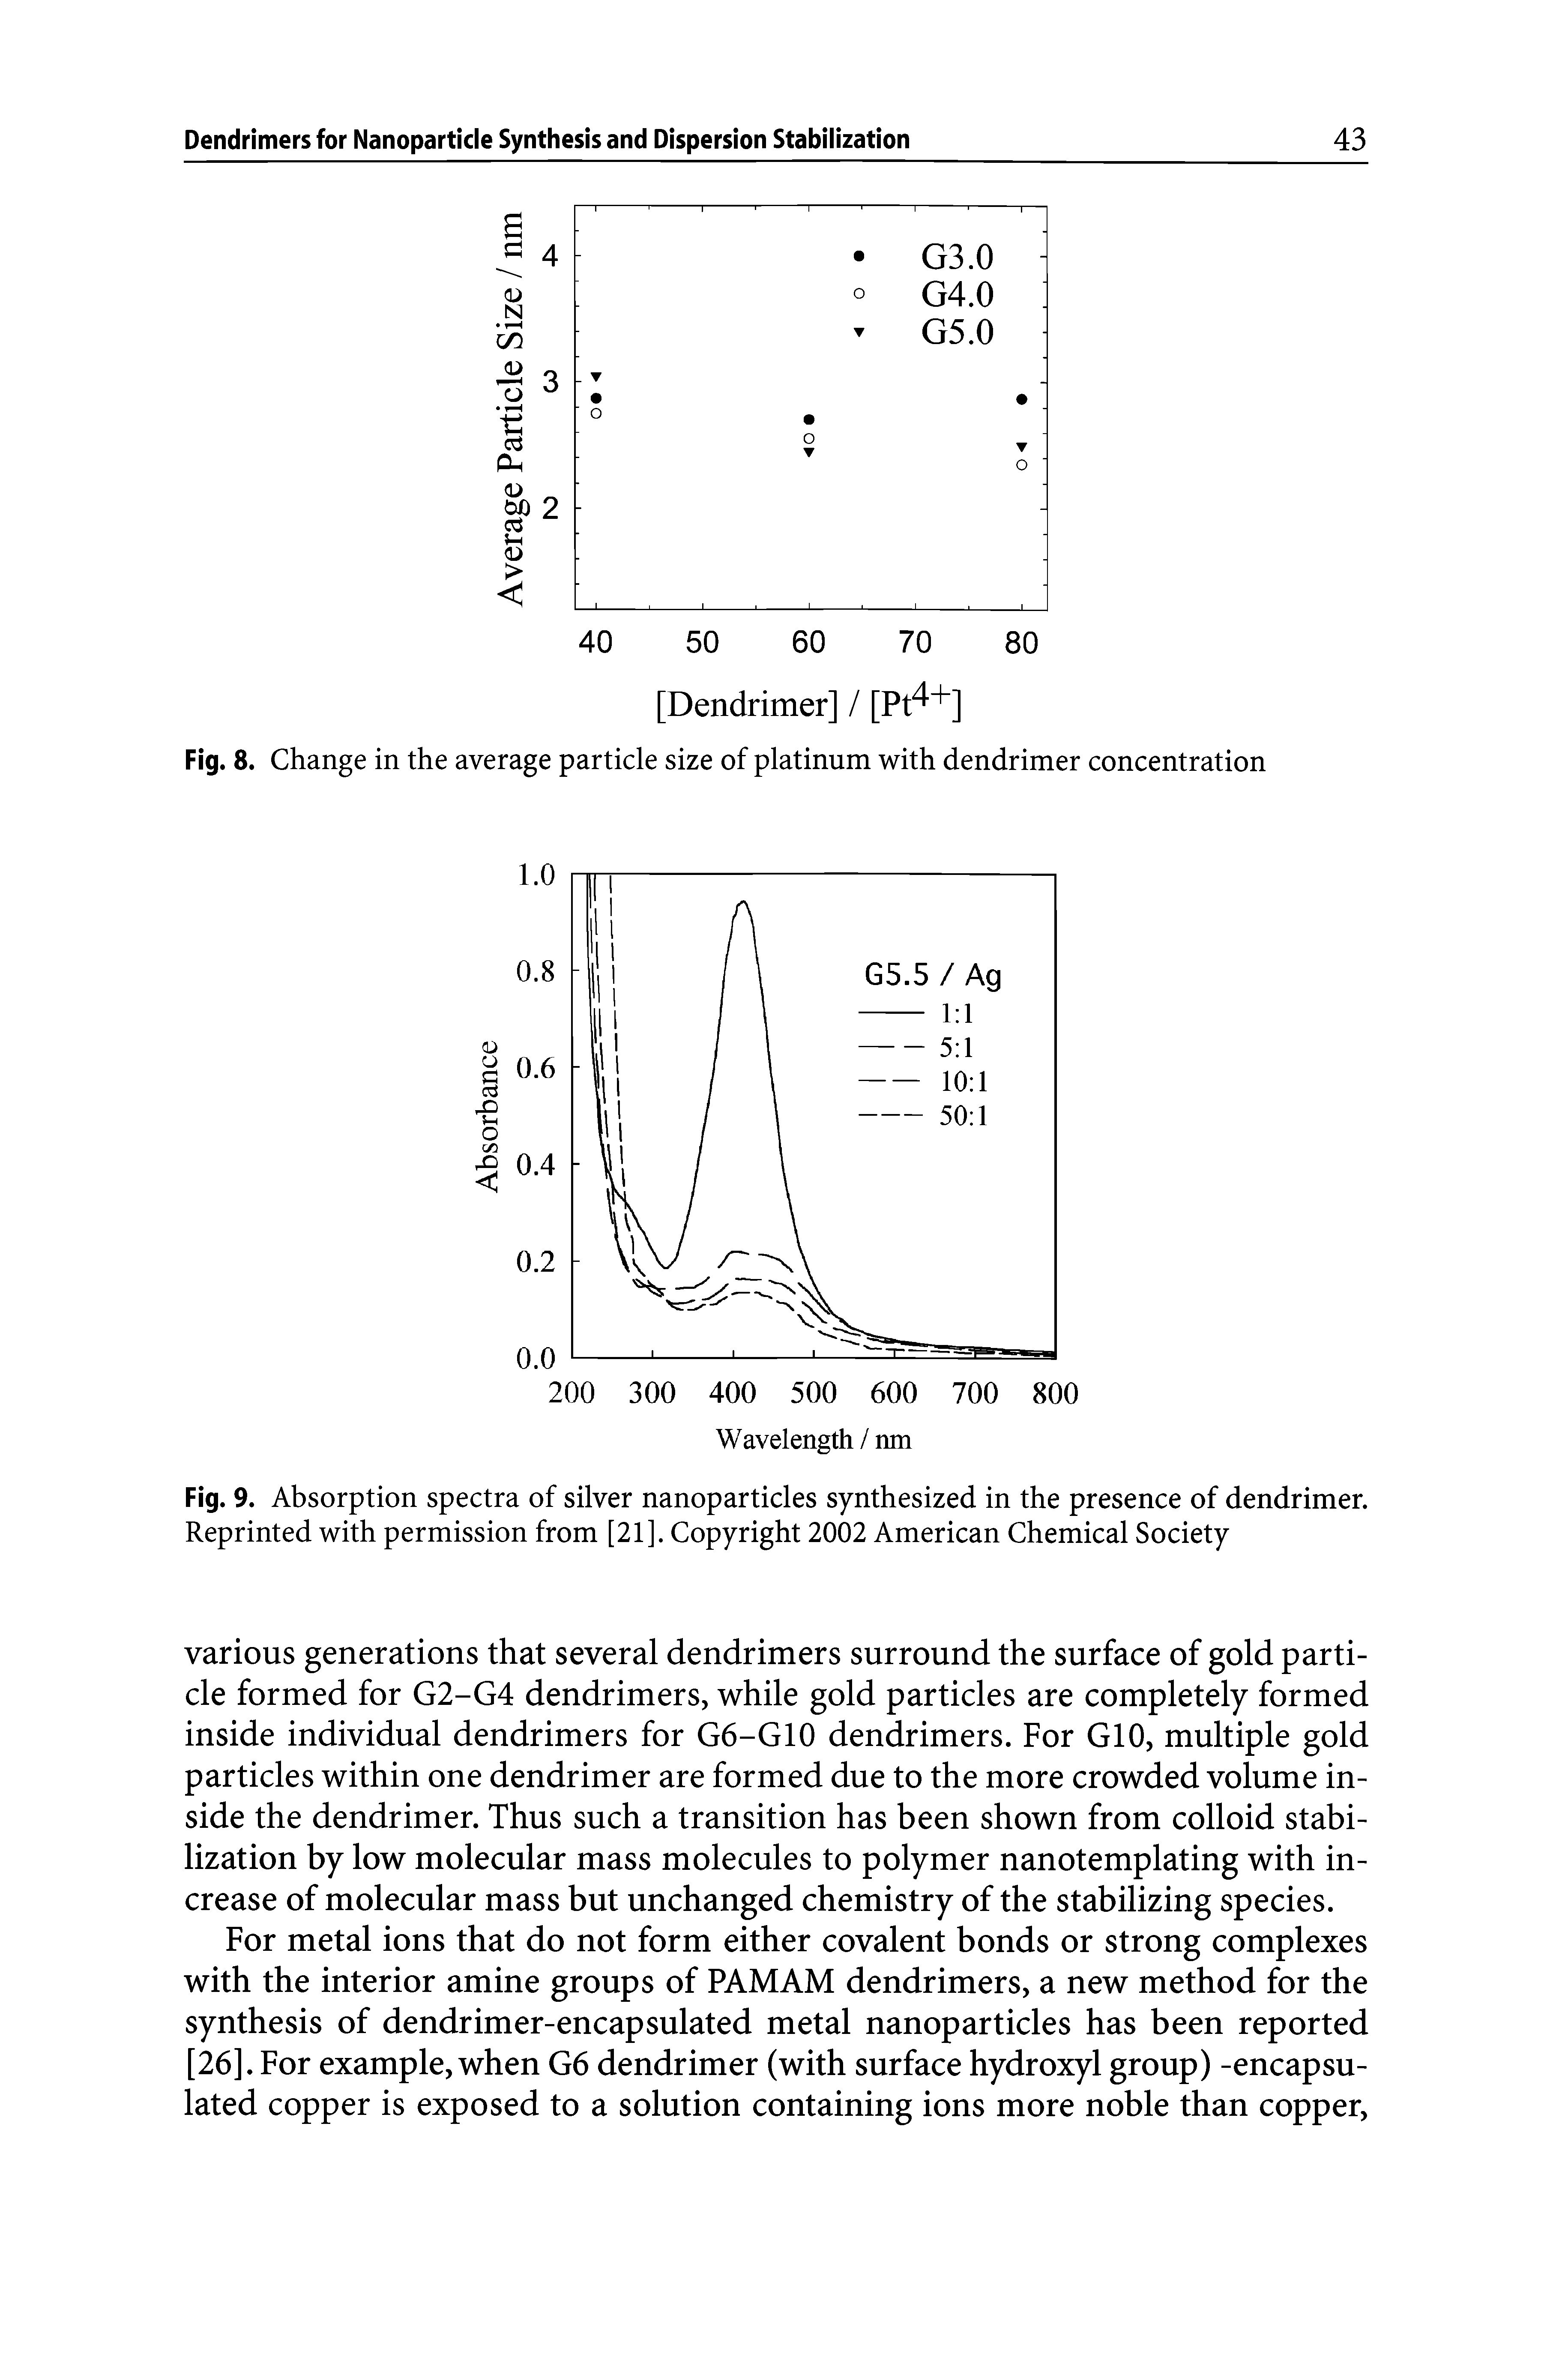 Fig. 9. Absorption spectra of silver nanoparticles synthesized in the presence of dendrimer. Reprinted with permission from [21]. Copyright 2002 American Chemical Society...